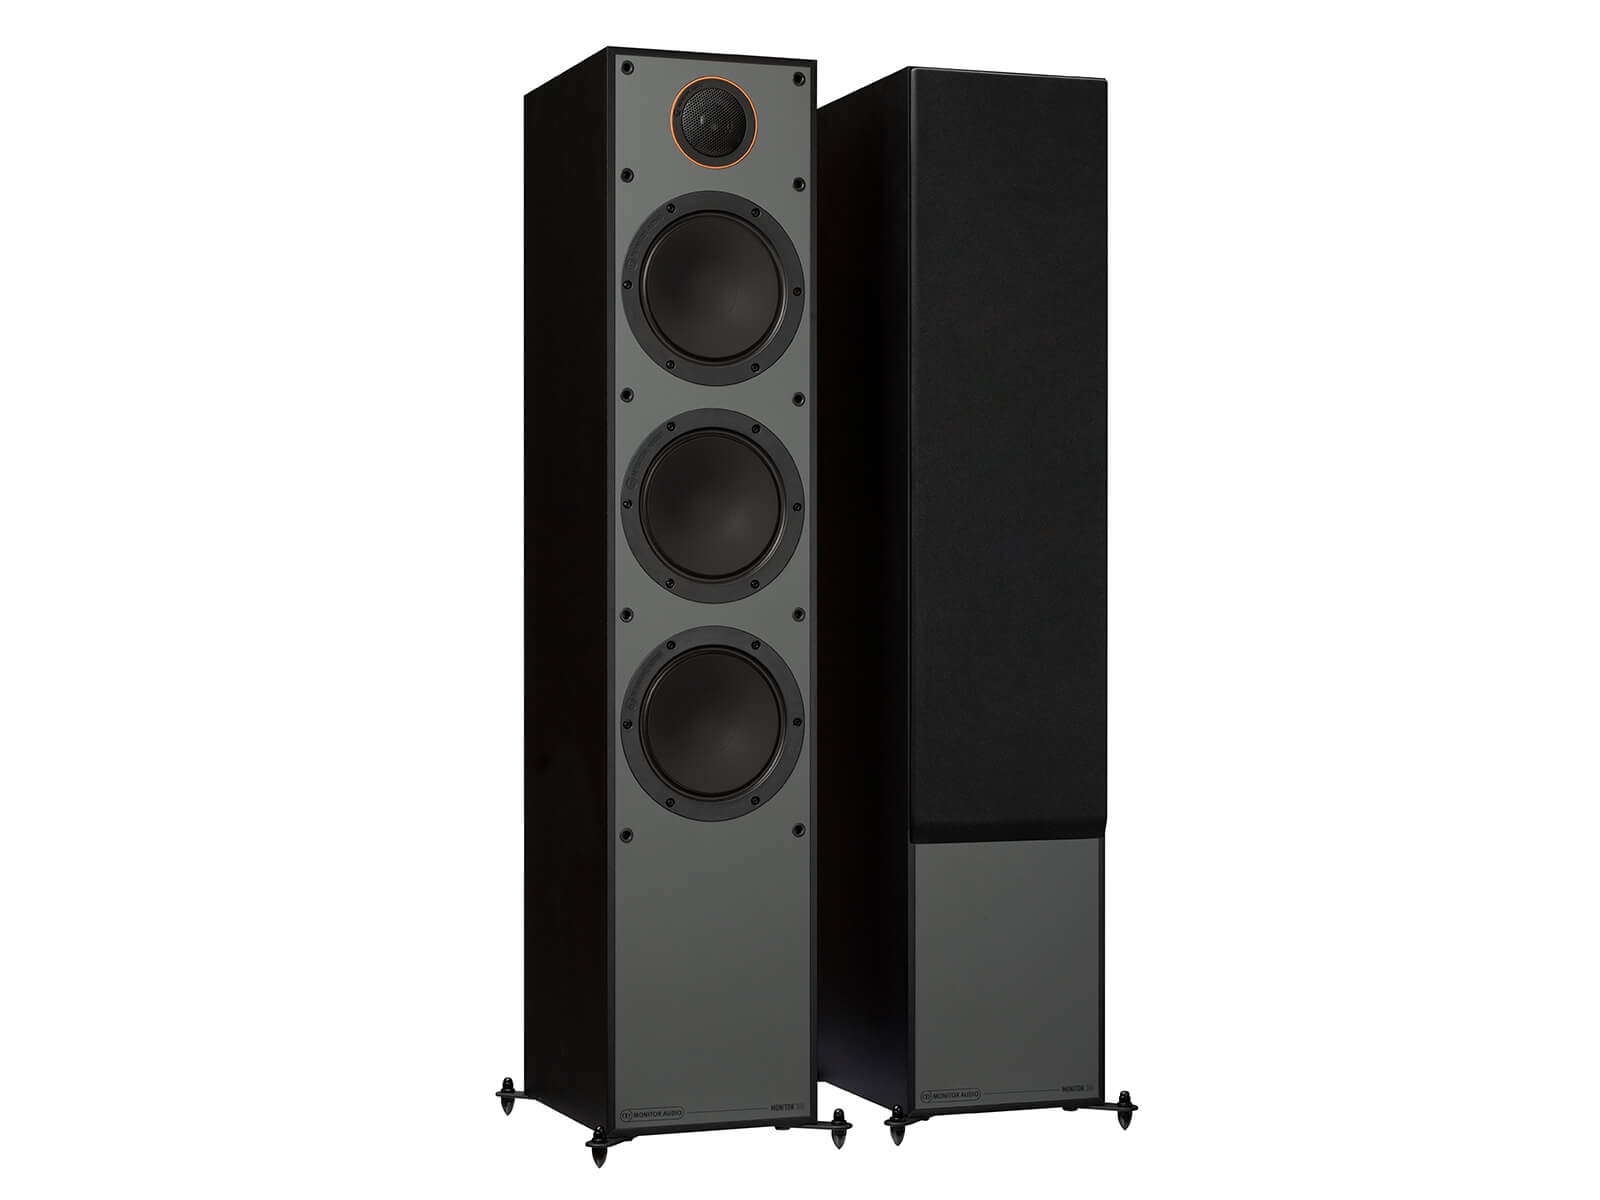 Monitor 300, floorstanding speakers, with and without grille in a black finish.